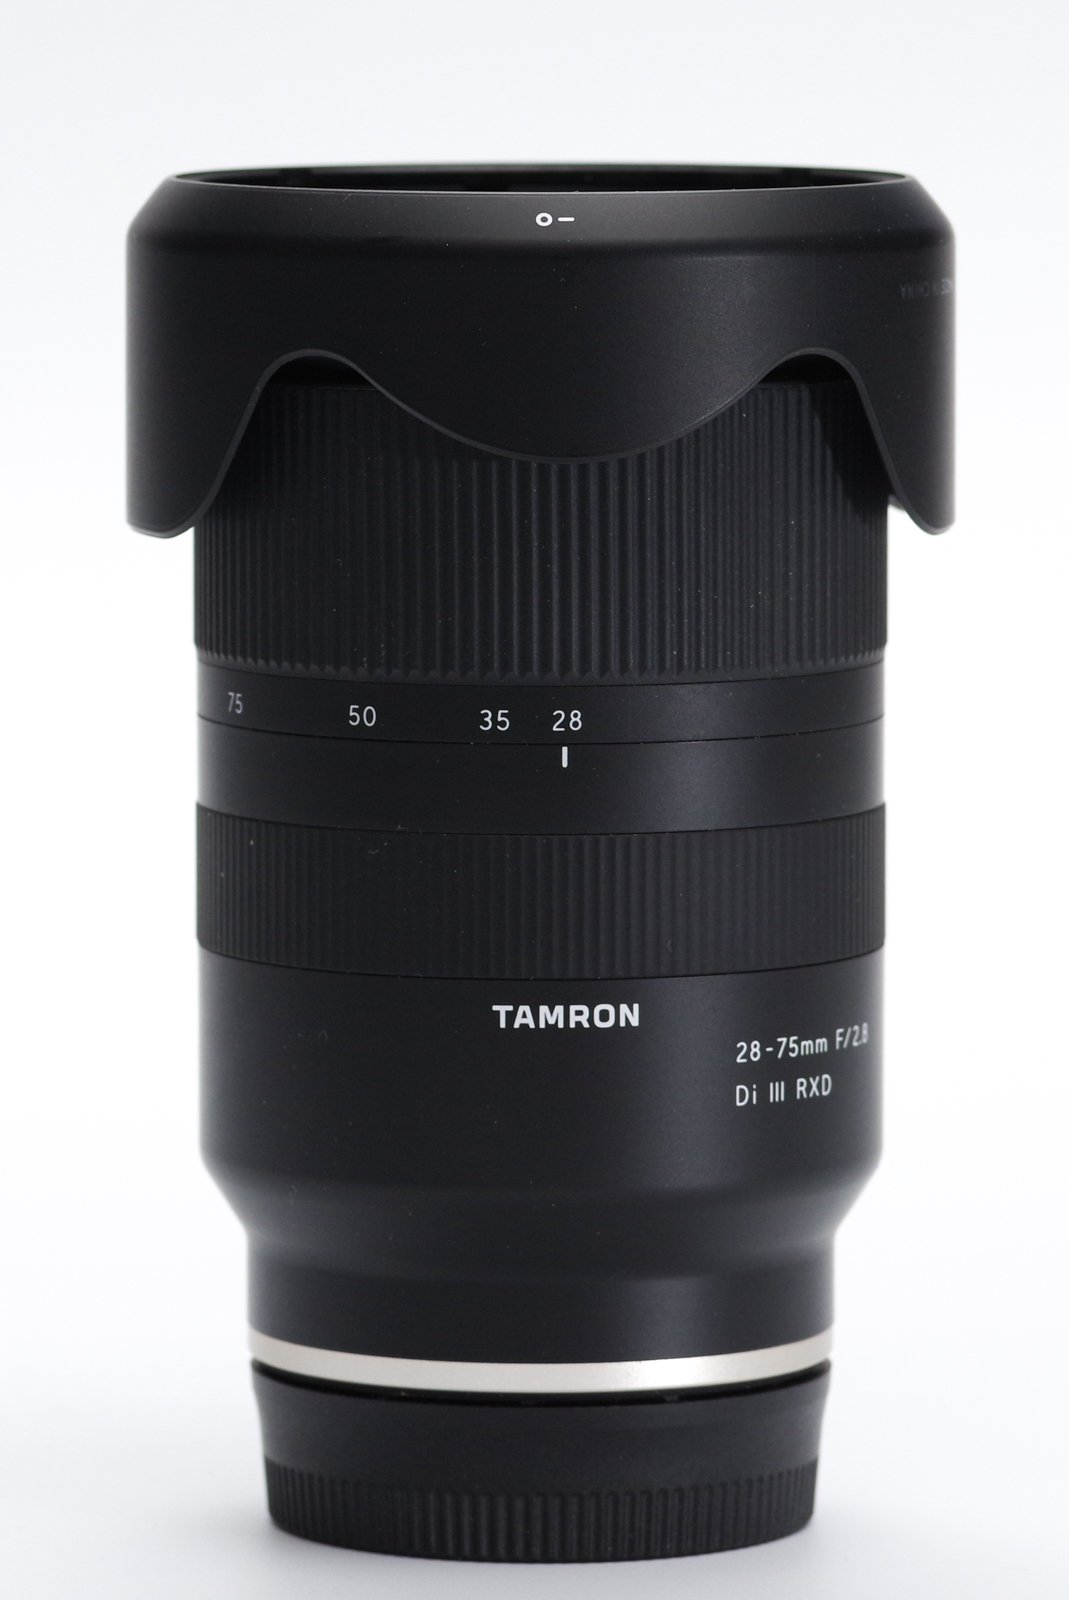 Tamron 28-75mm F2.8 Di III RXD Review - AlphaShooters.com